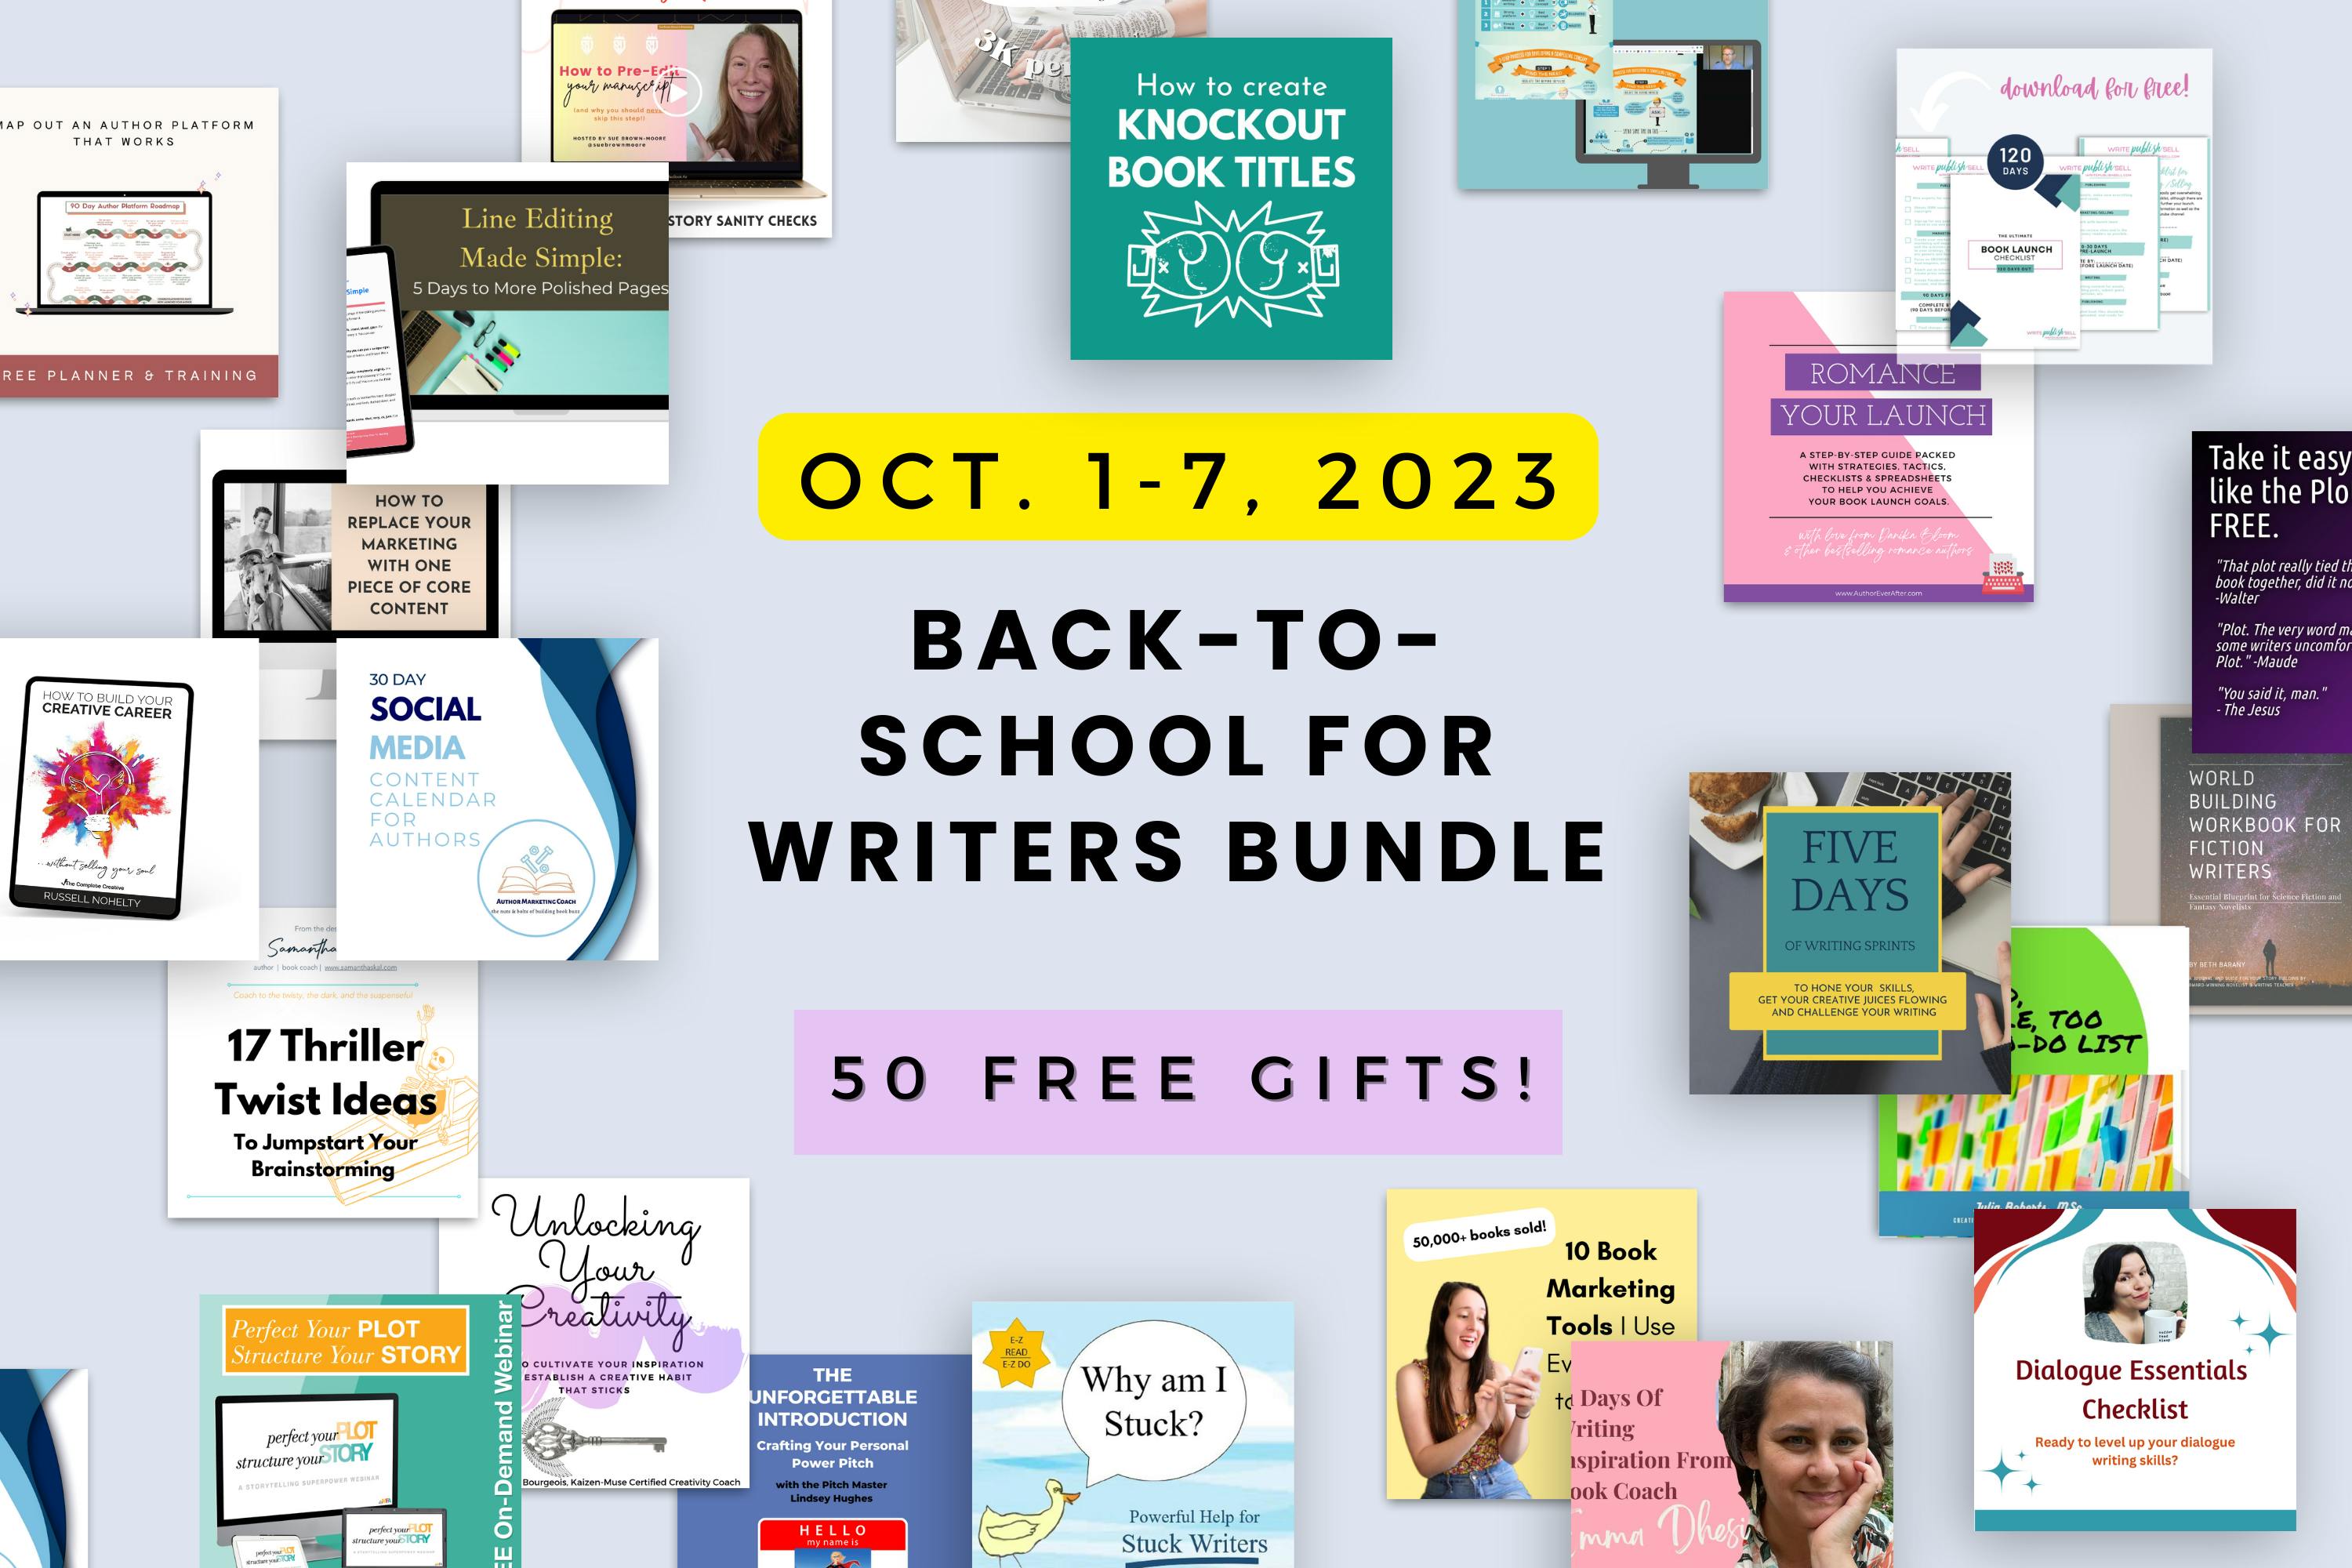 A preview of the goodies you can get for free inside the Back To School for Writers bundle